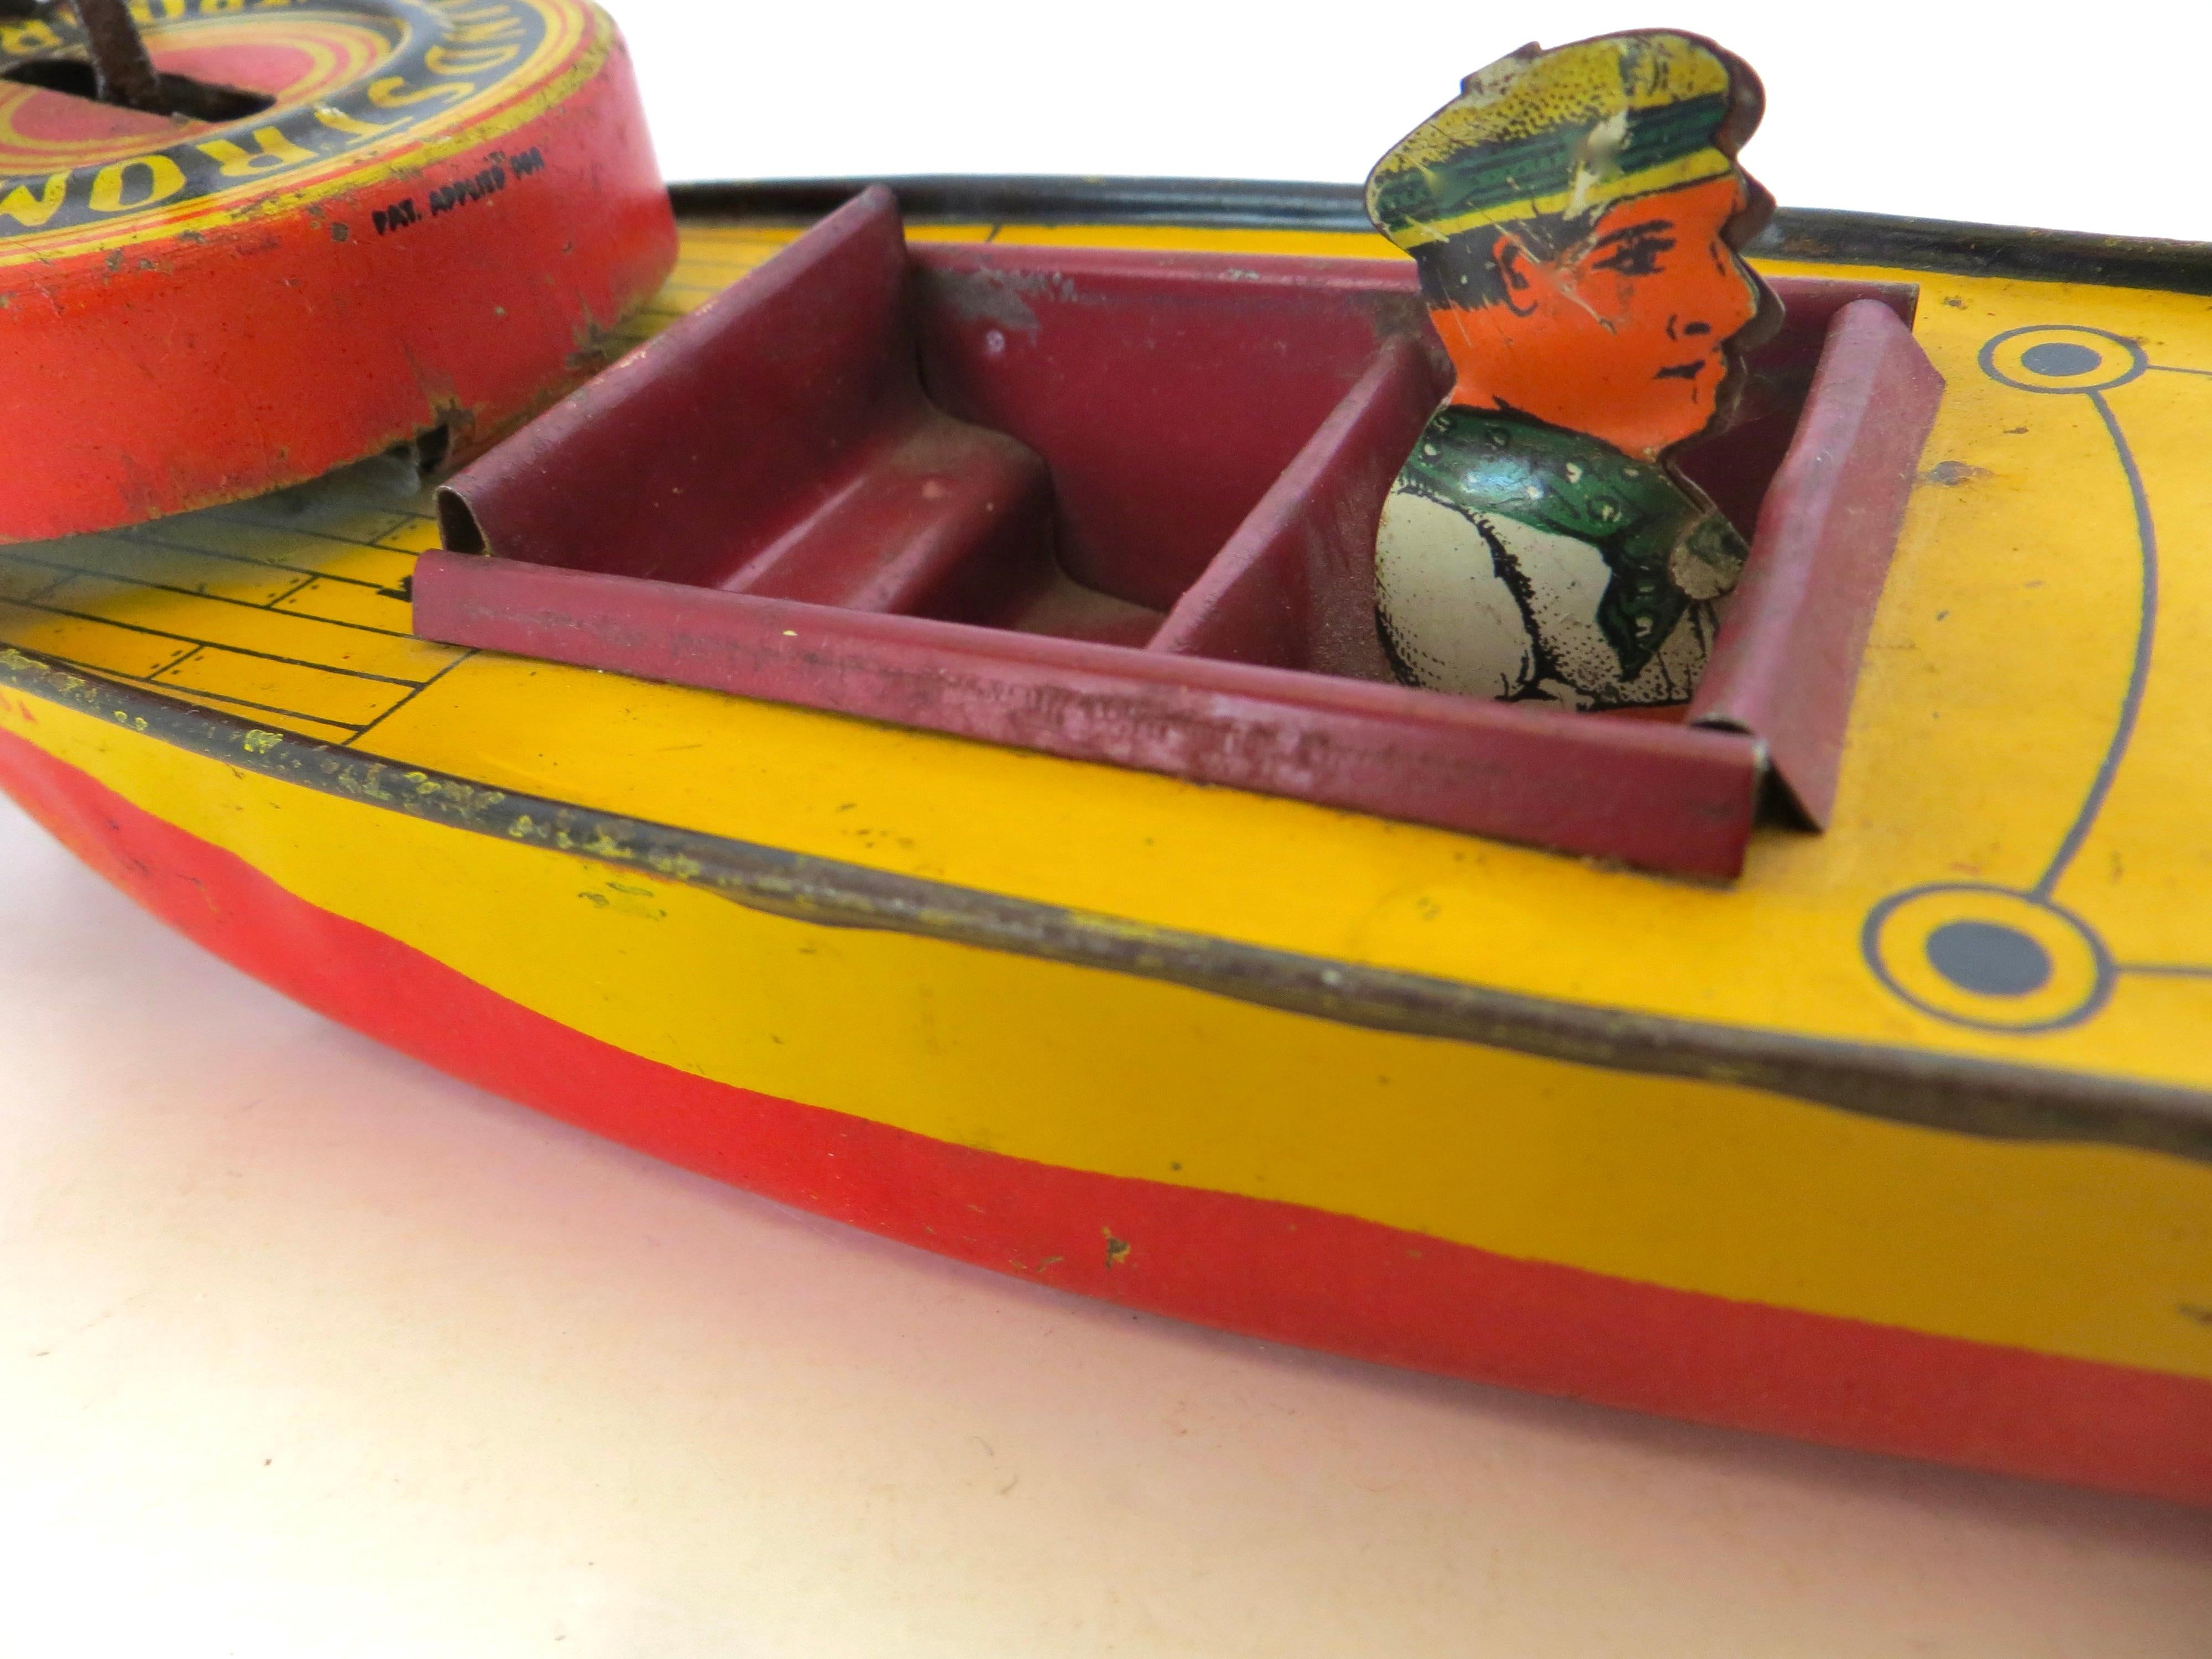 Metalwork Vintage Toy Wind-Up Speed Boat with Driver by Lindstrom Toy Co., American 1933 For Sale